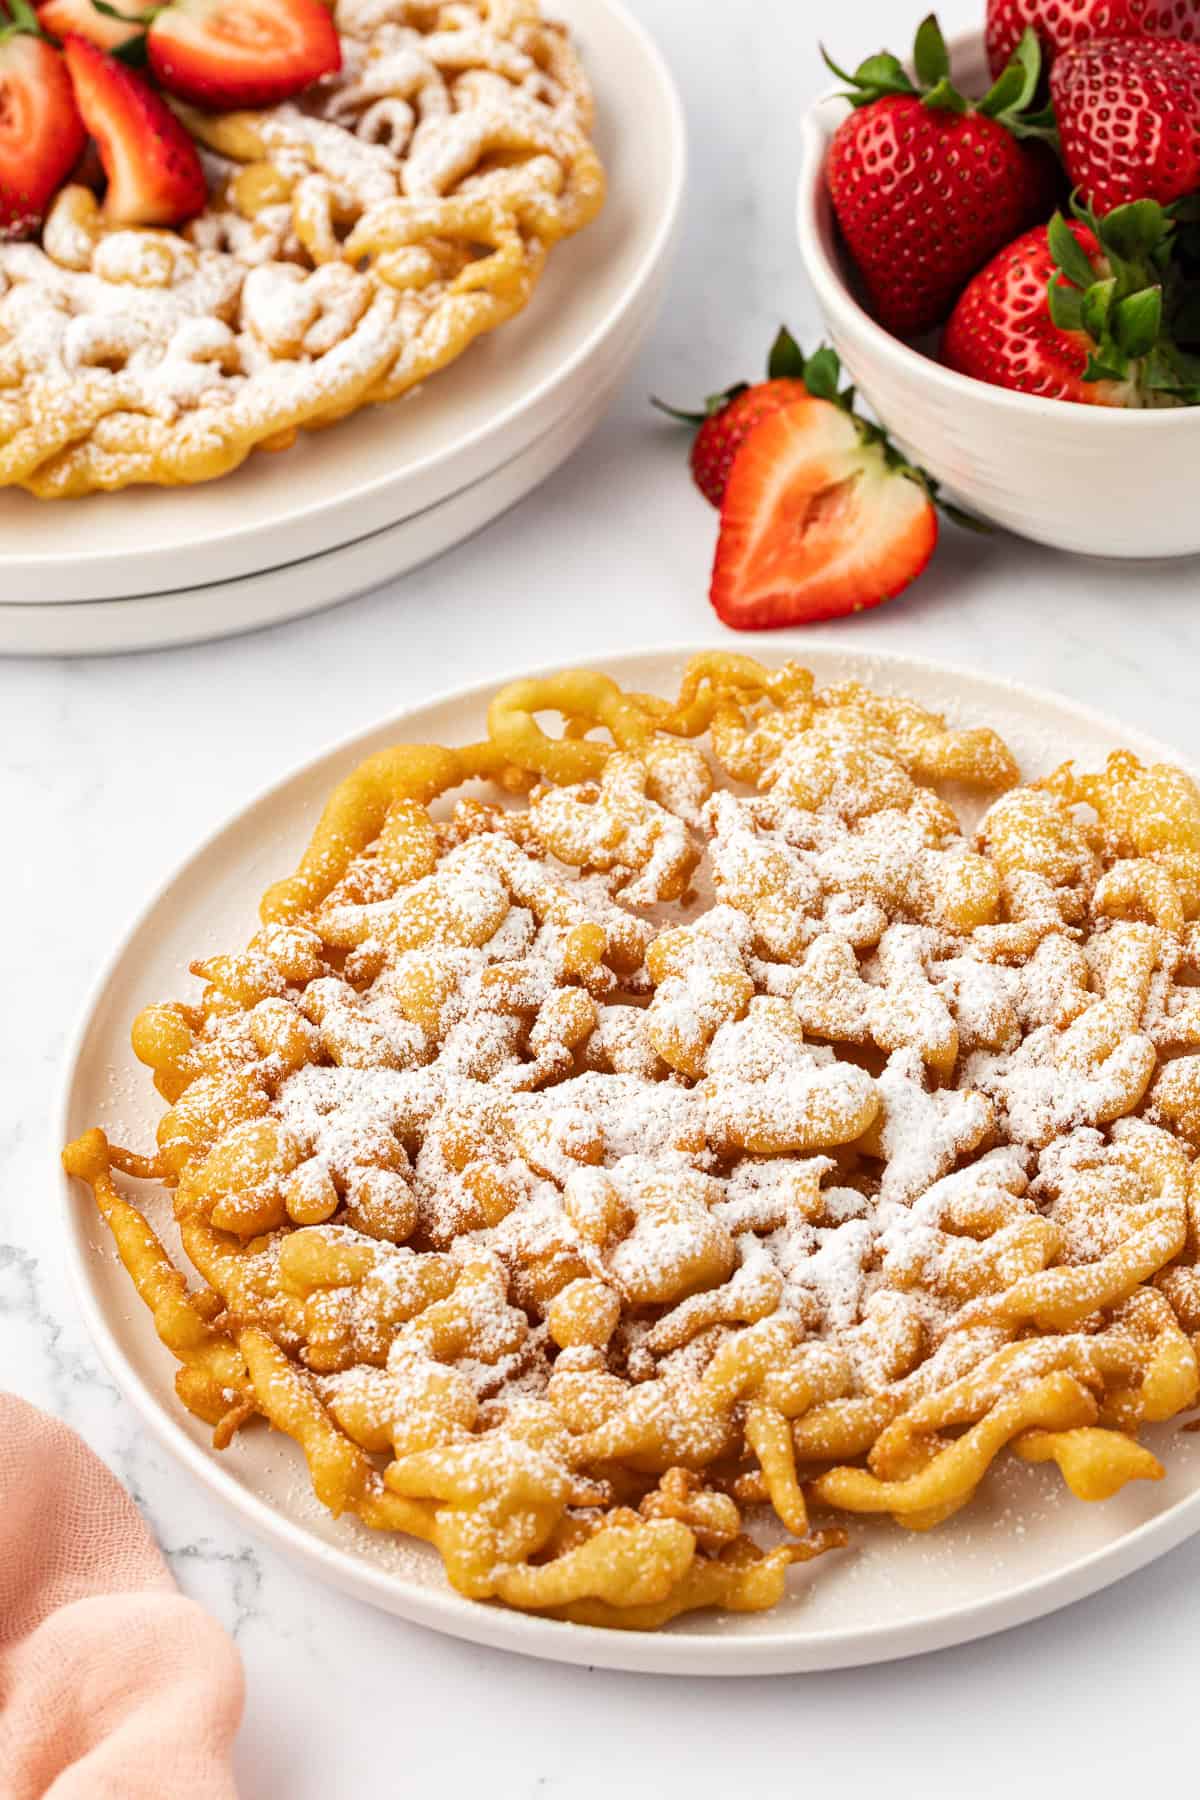 two funnel cakes on white plates with the front one topped with powdered sugar and the back one topped with powdered sugar and fresh strawberries, and a bowl of whole strawberries on the right